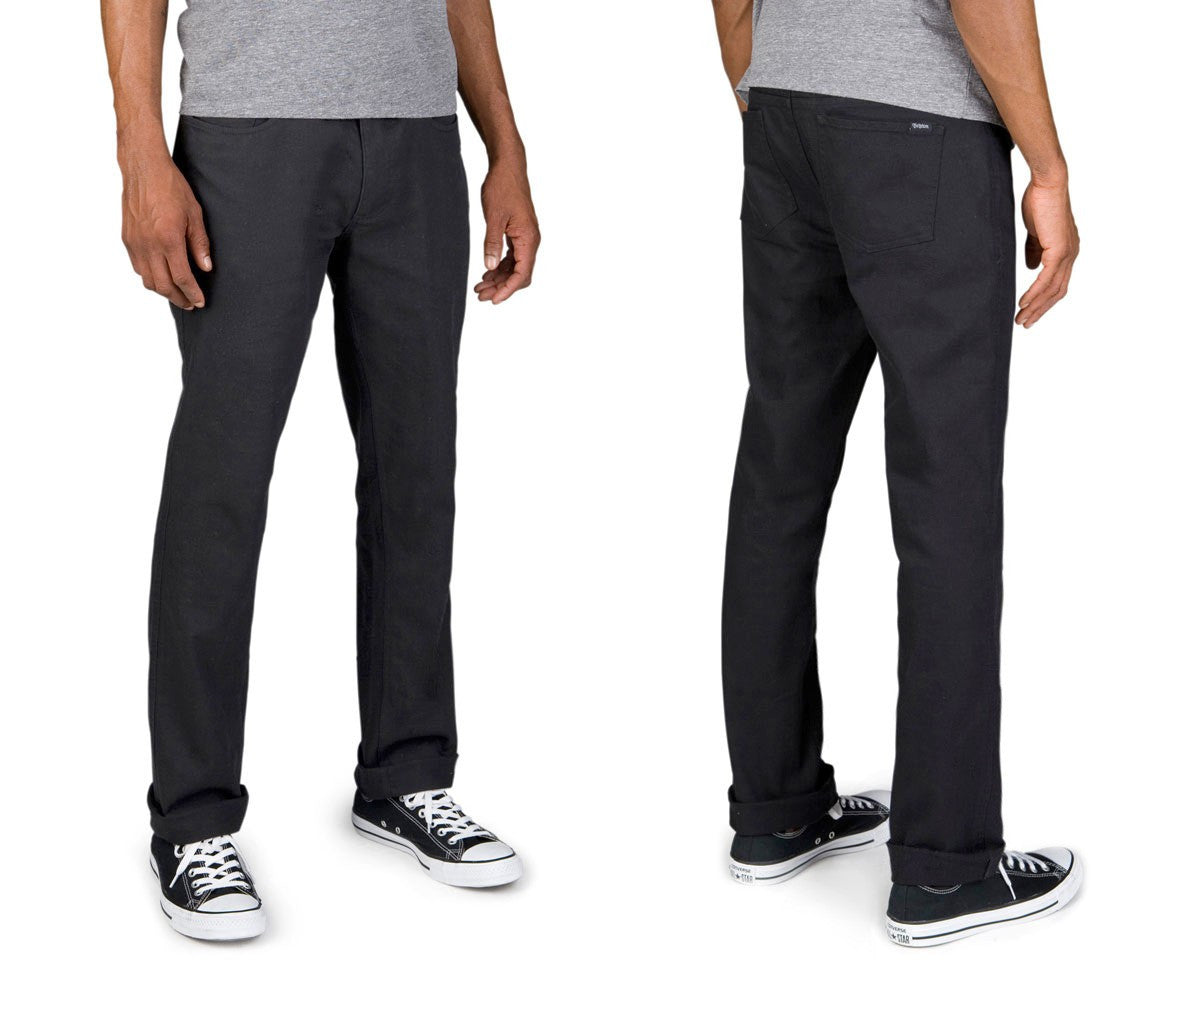 Brixton - Reserve Standard Fit Men's Chino Pants, Black - The Giant Peach